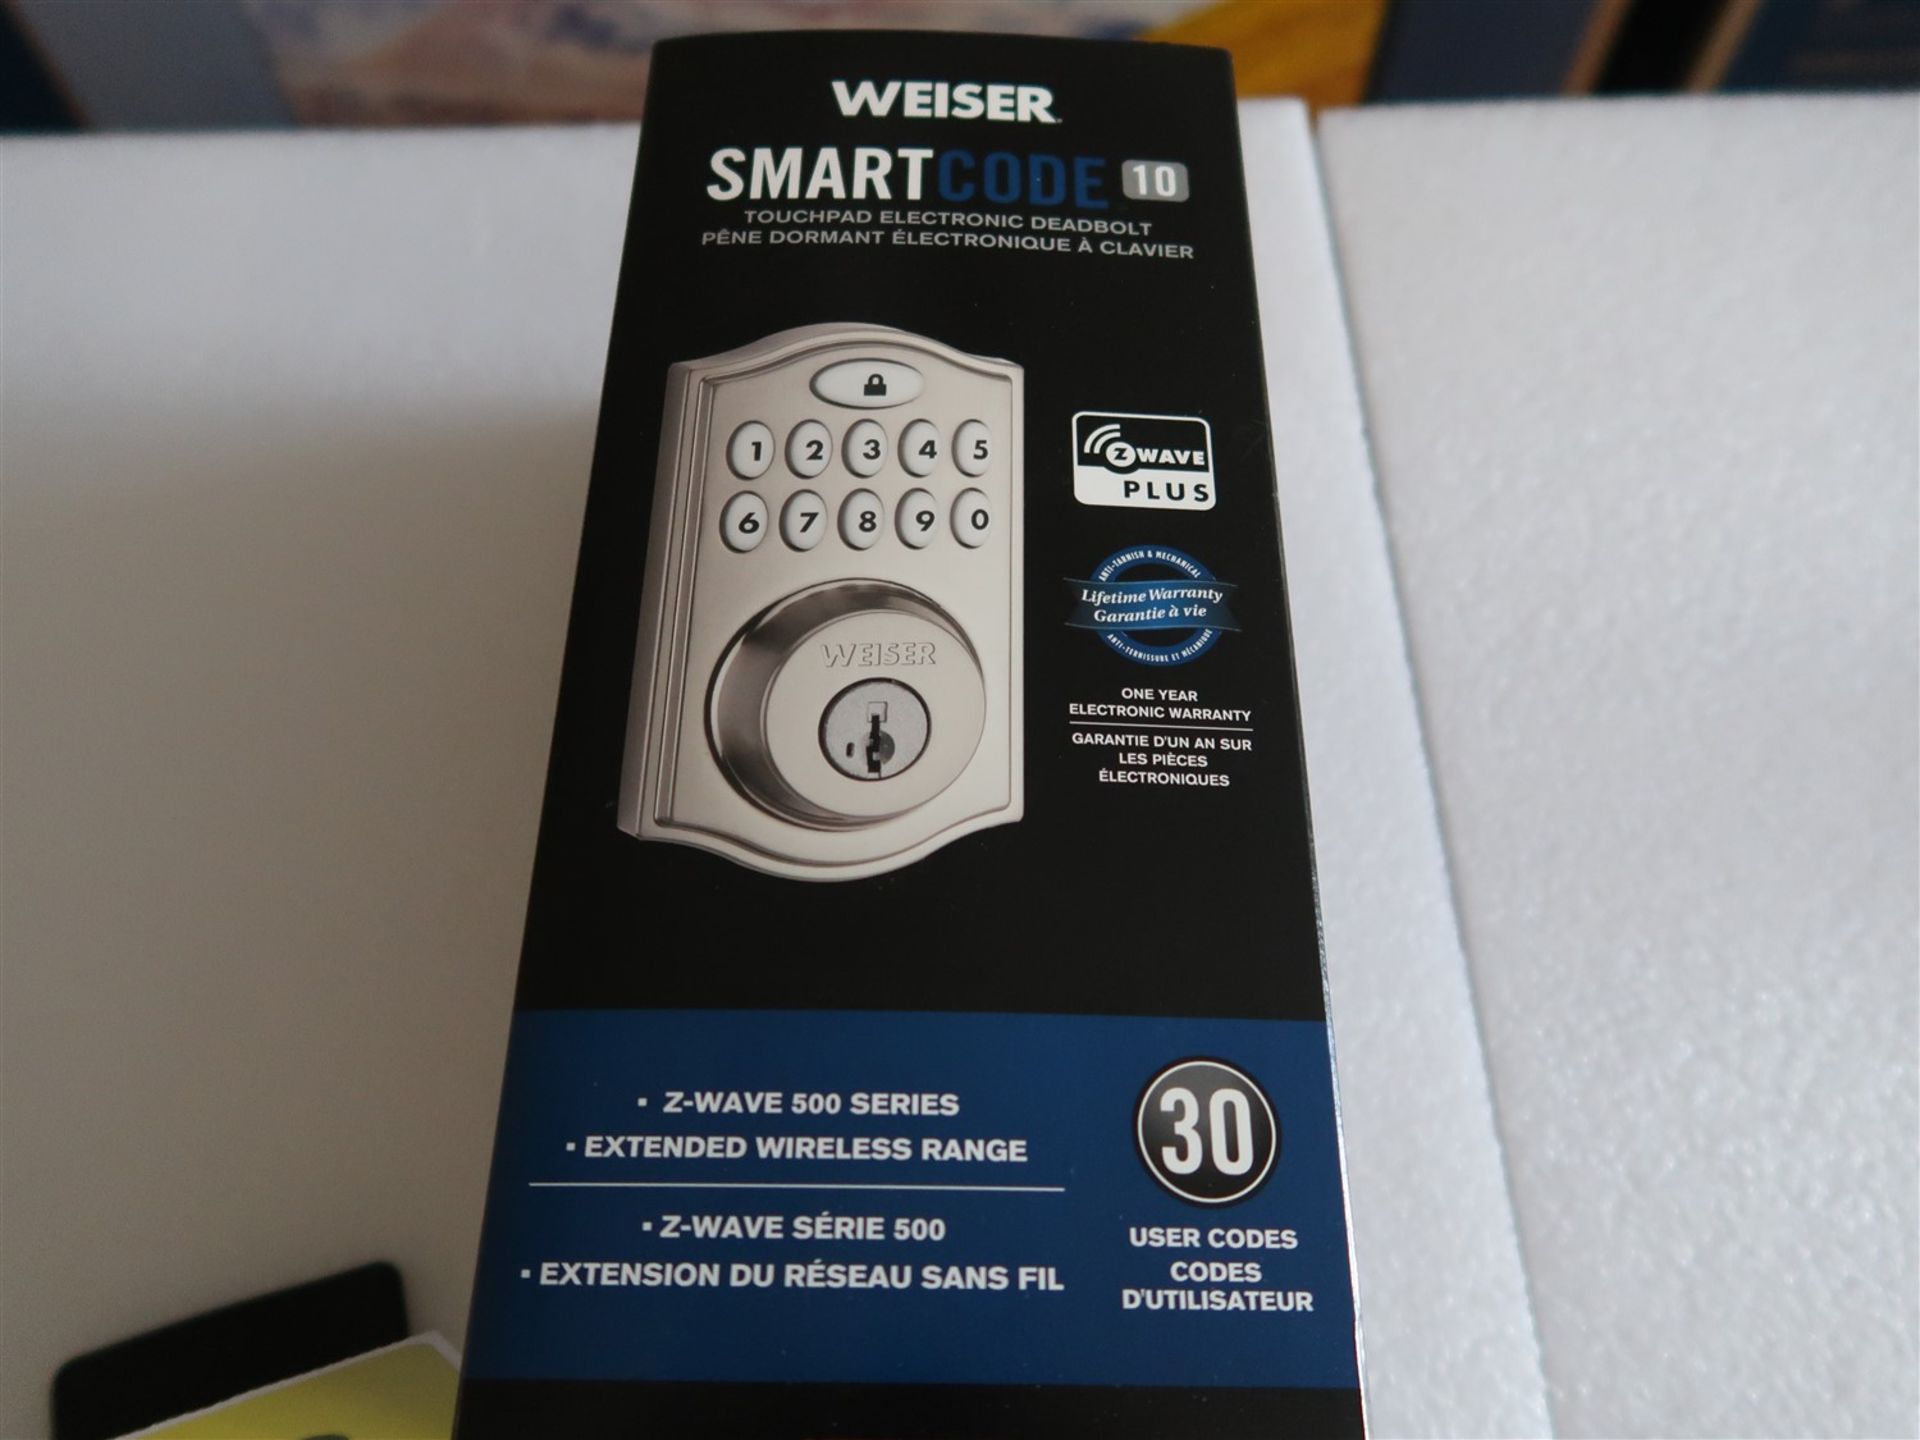 WEISER SMART CODE 10 TOUCH PAD ELECTRONIC DEAD BOLT SILVER FINISH 9GED 18000-016, (BNIB) - Image 2 of 3